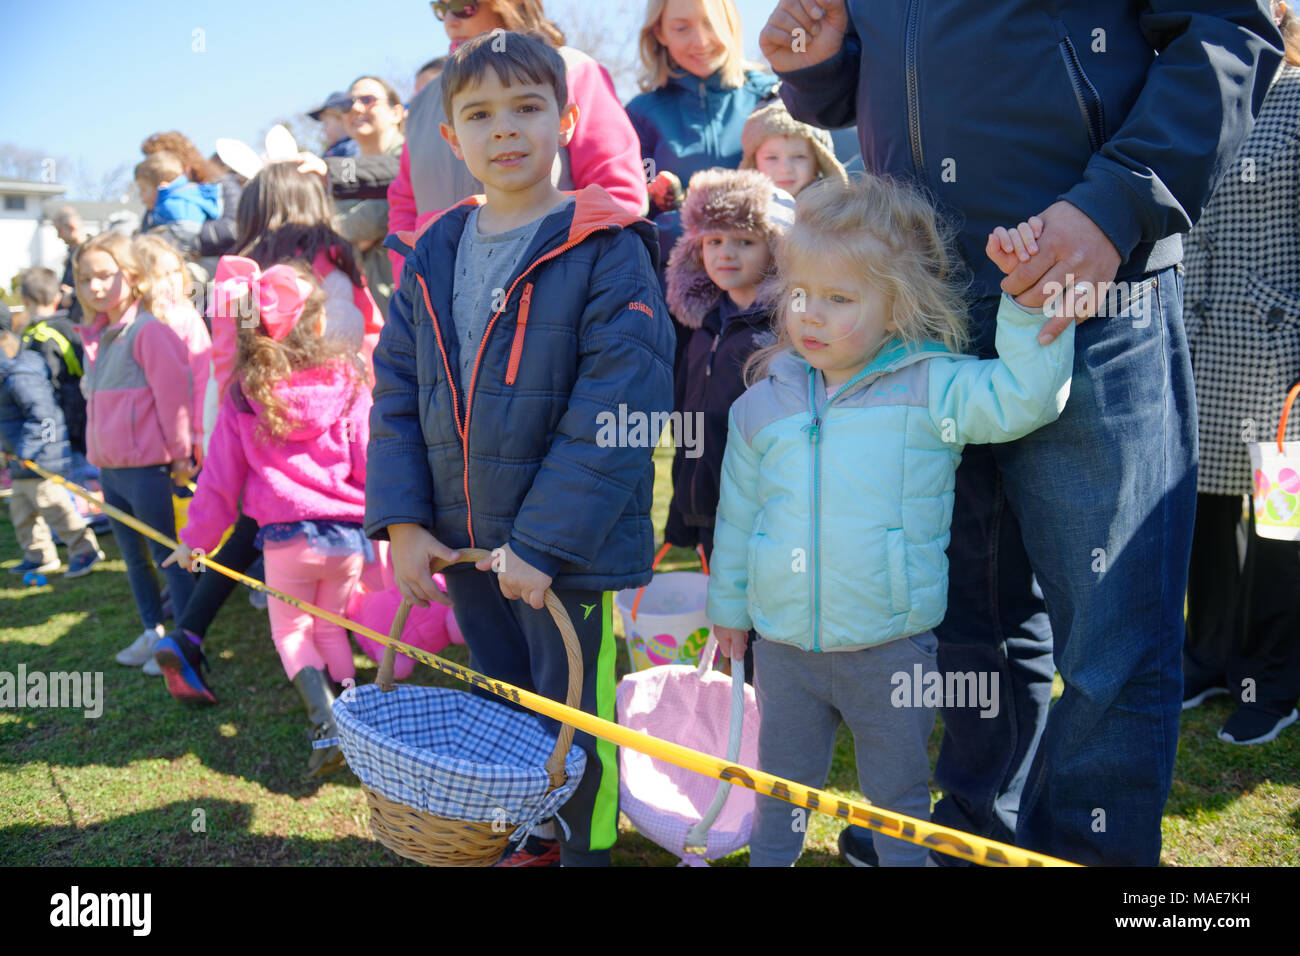 North Merrick, New York, USA. March 31, 2018. Young girls and boys eagerly wait behind yellow tape for start of traditional Easter Egg Hunt at the Annual Eggstravaganza, held at Fraser Park and hosted by North and Central Merrick Civic Association (NCMCA). Credit: Ann E Parry/Alamy Live News Stock Photo